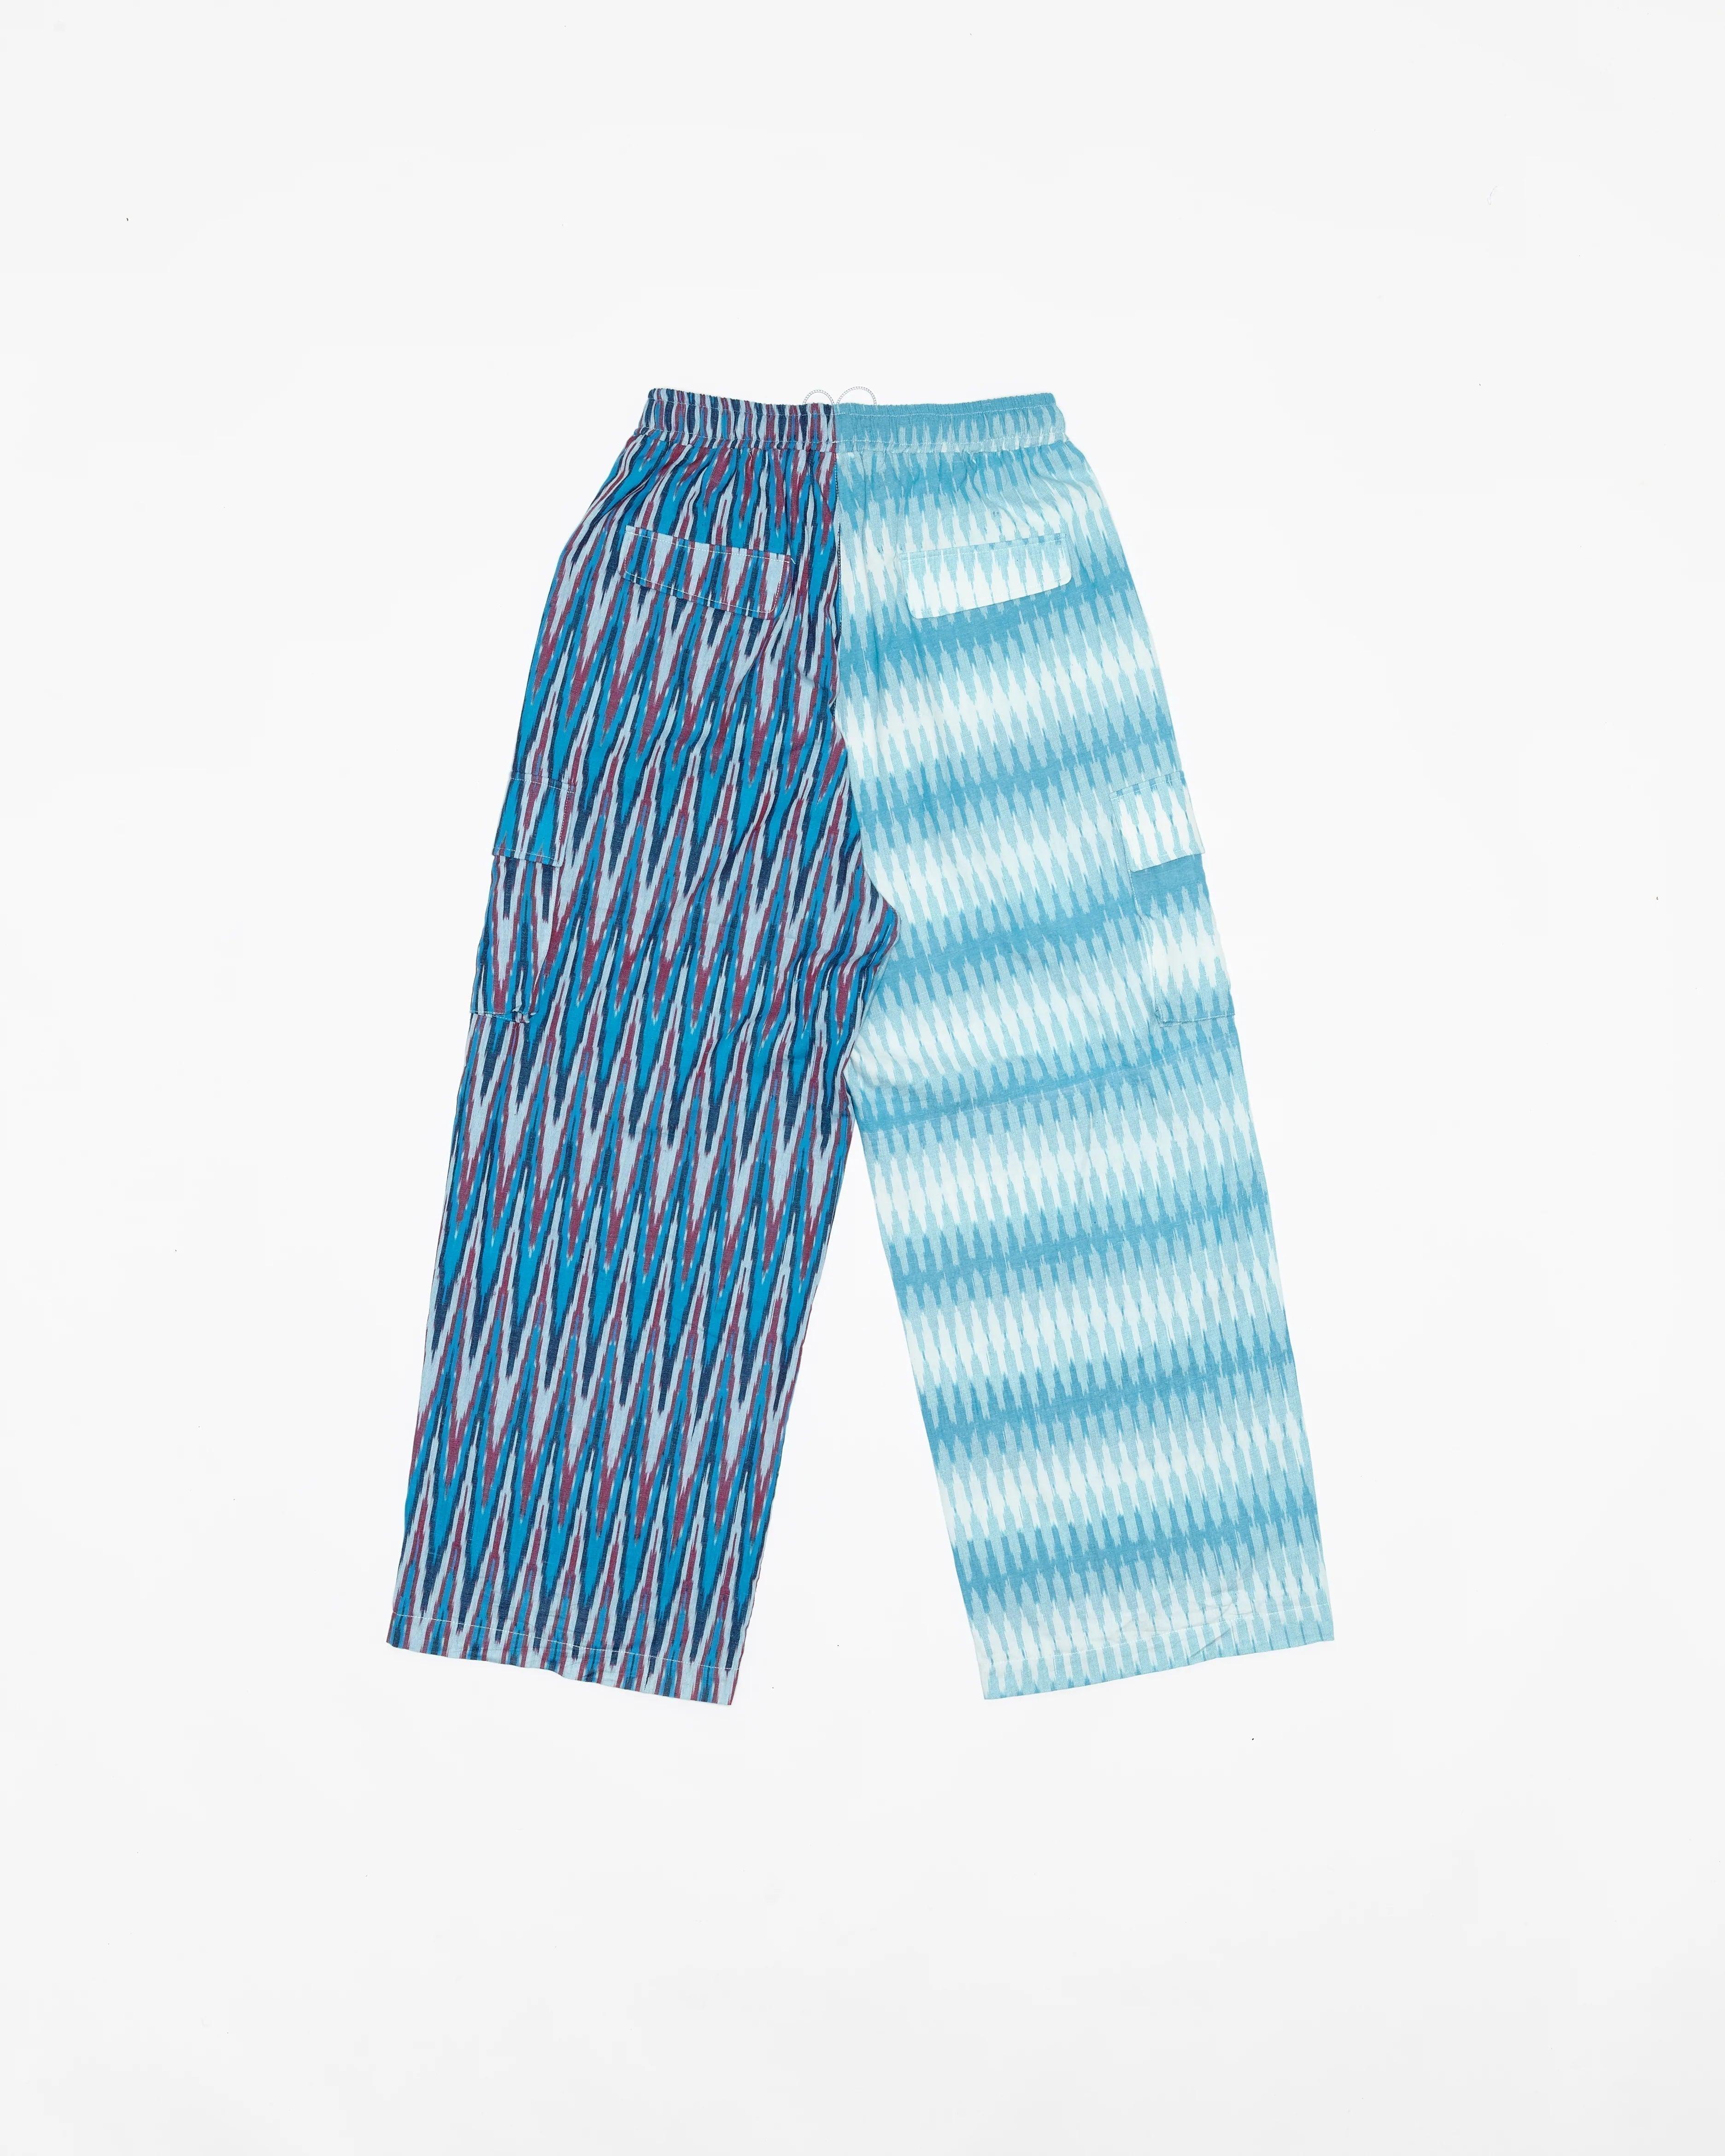 STAMM House Ikat Trousers - SUPERCONSCIOUS BERLIN